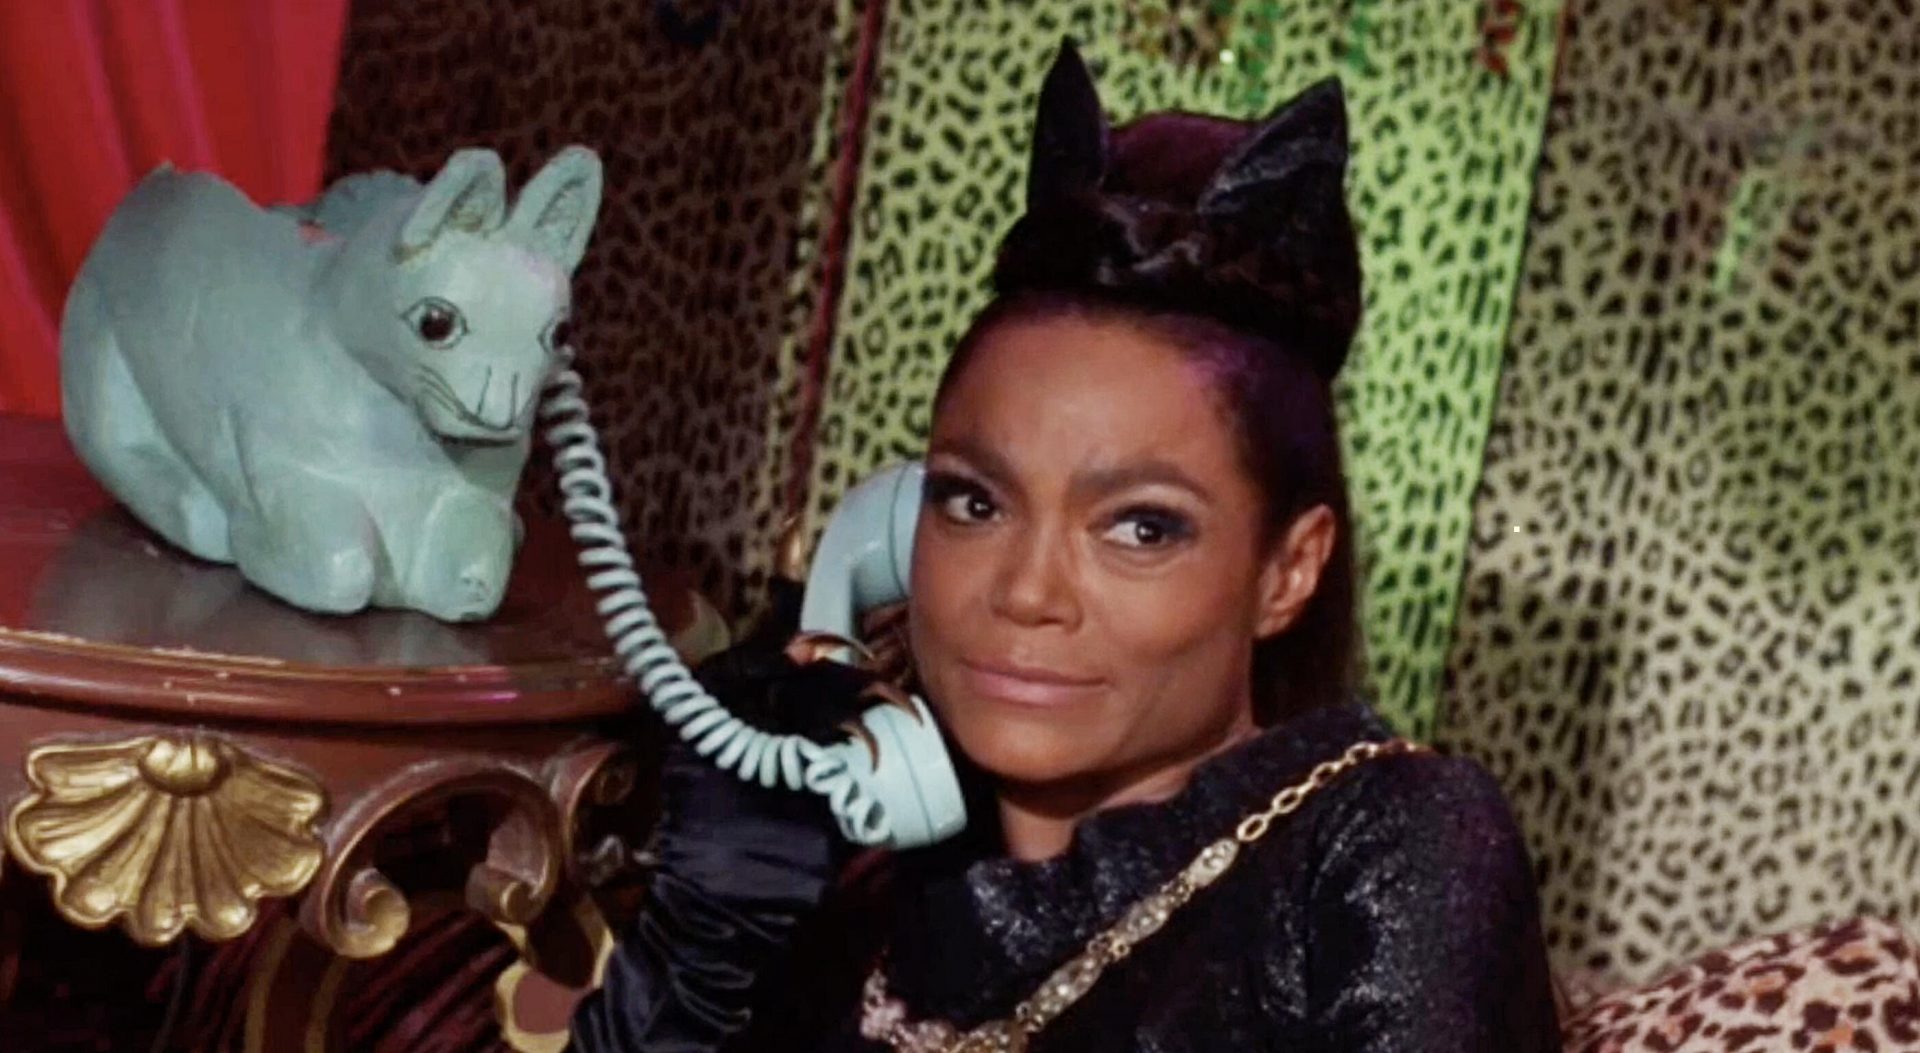 A still from Batman 66 shows Eartha Kitt as Catwoman wearing a black catsuit with a cat on her head speaking into a sheep shaped phone